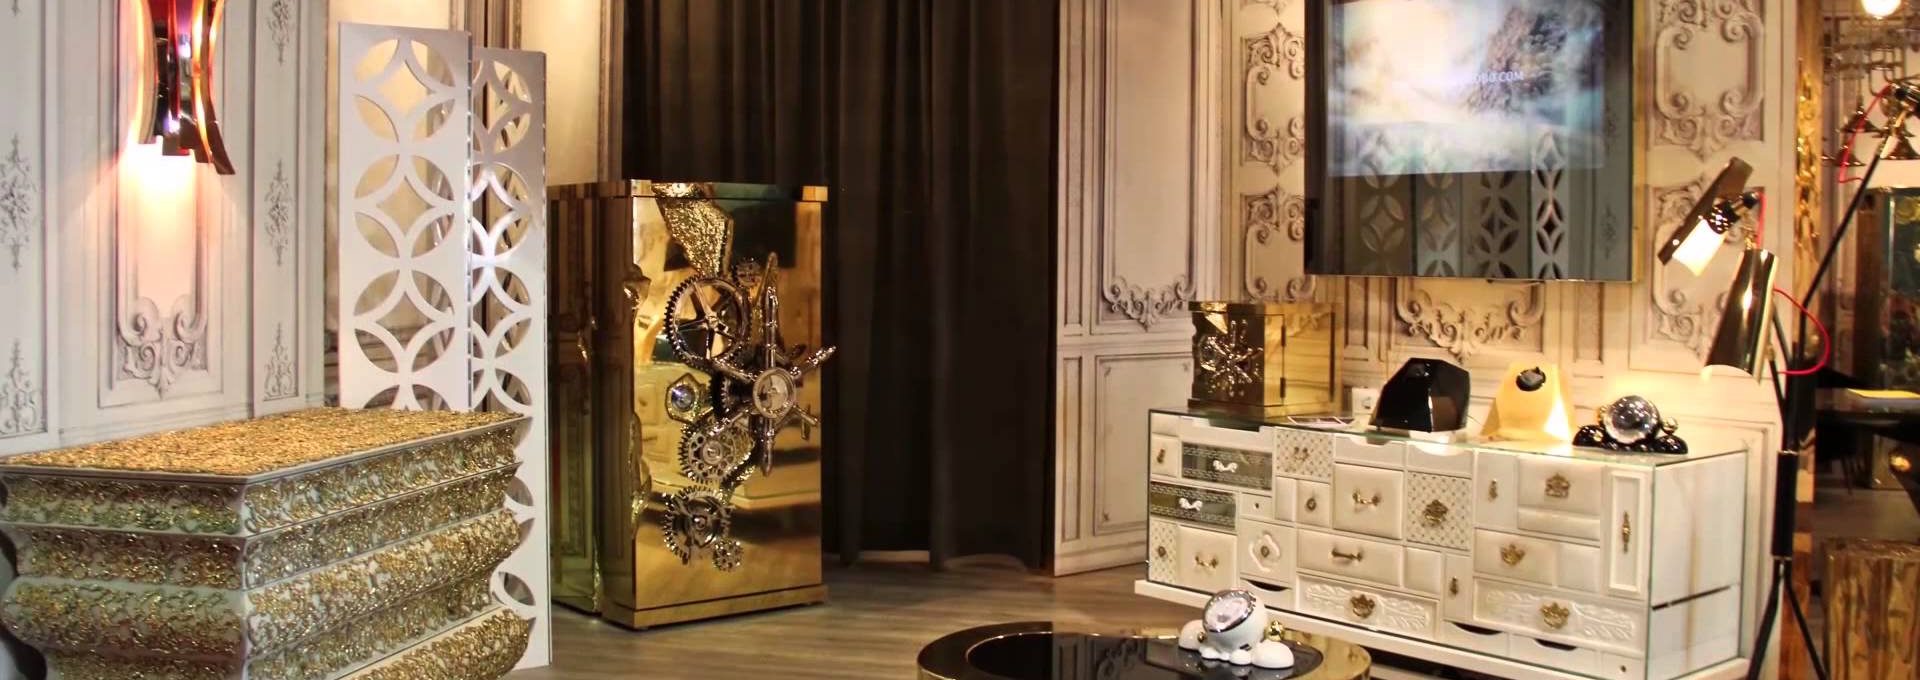 PROTECT YOUR DEAREST OBJECTS IN STYLE WITH THESE AMAZING LUXURY SAFES